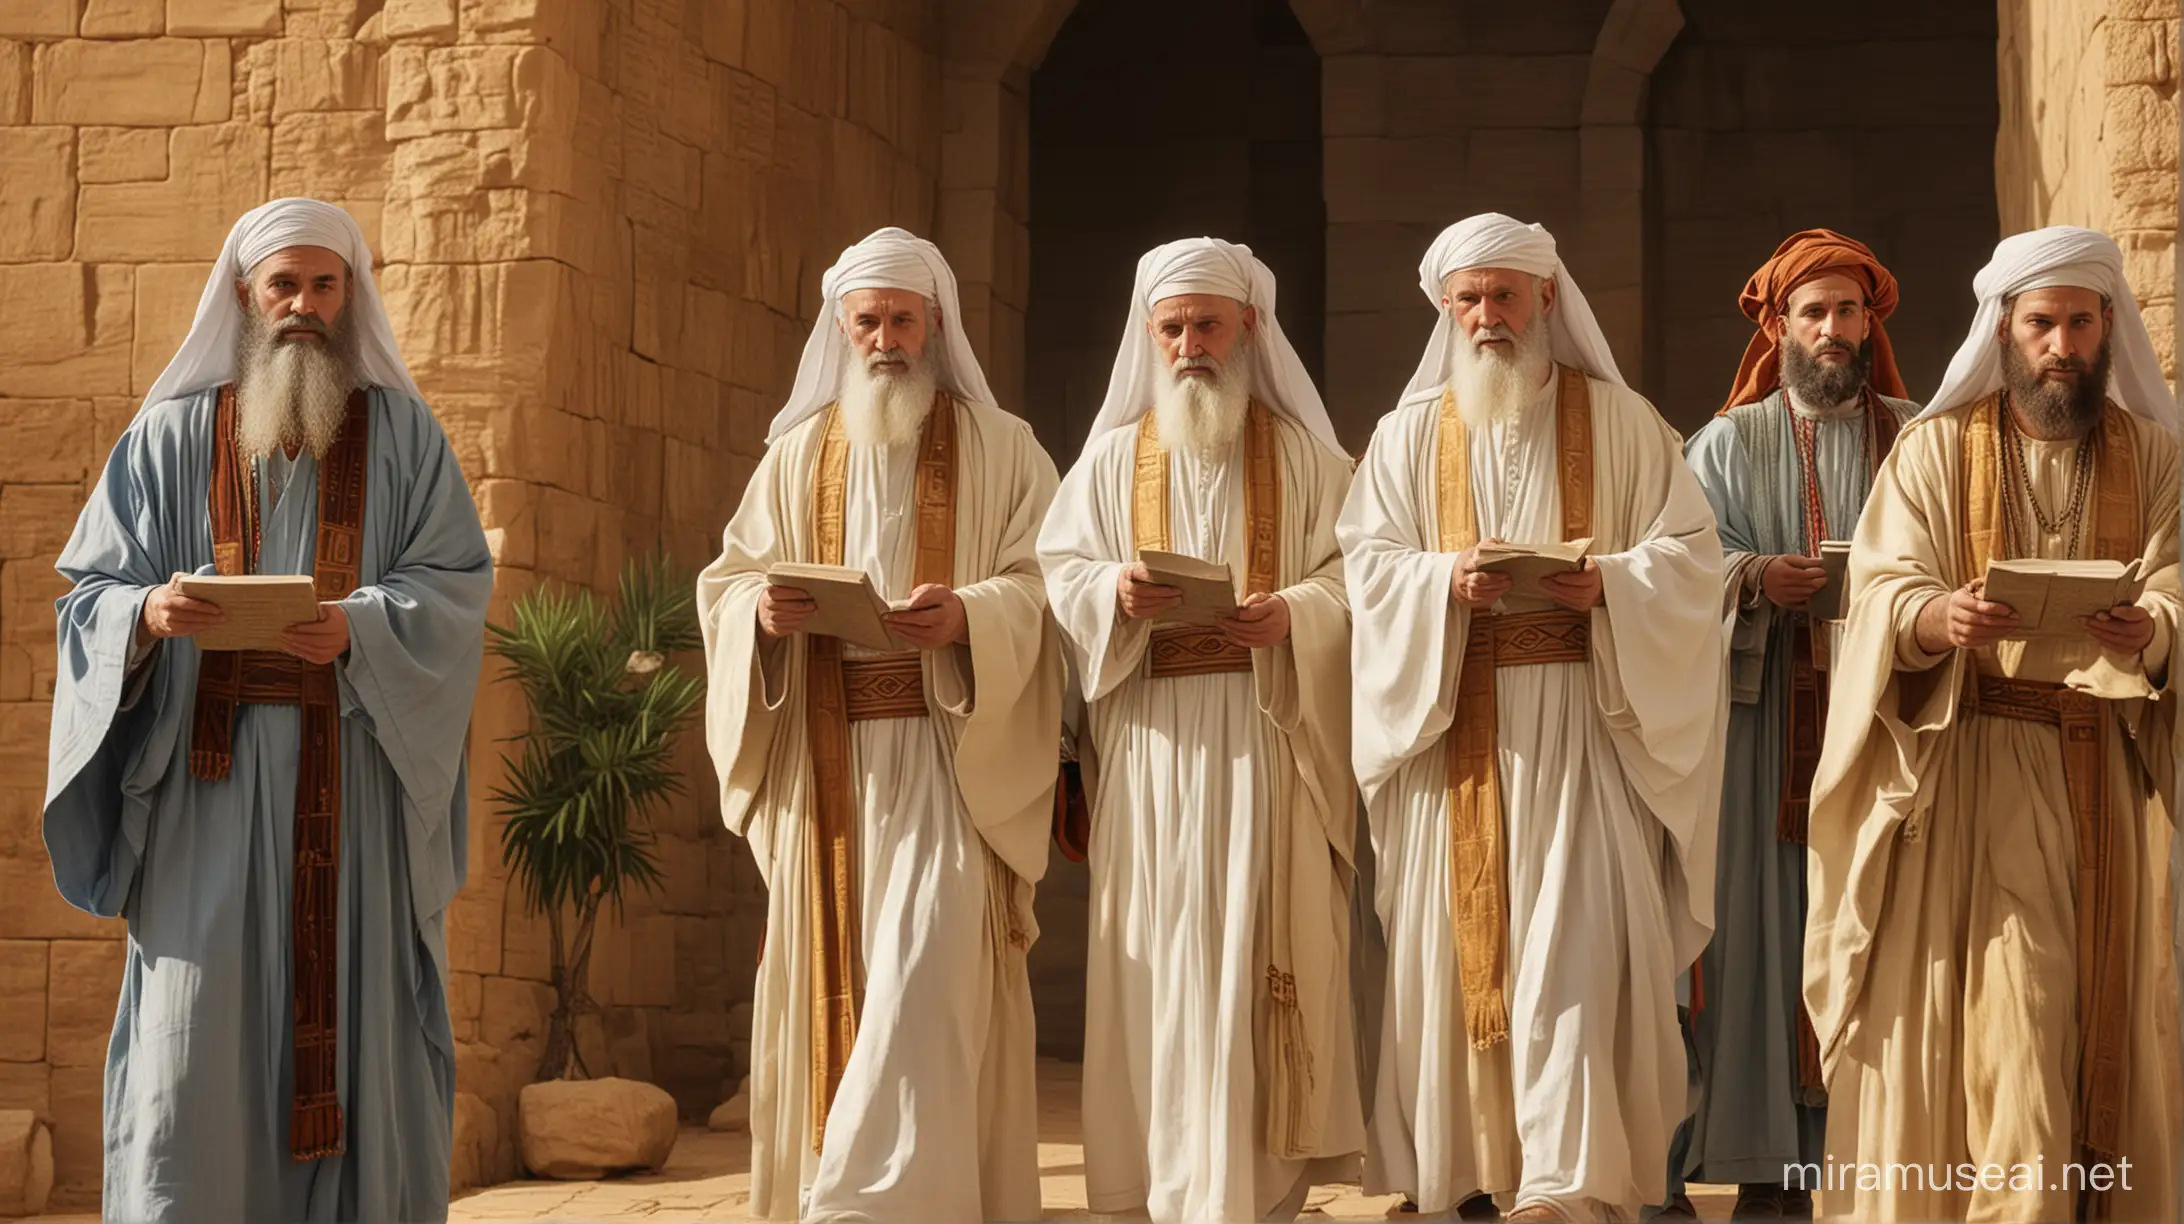 Levitical priests from moses era